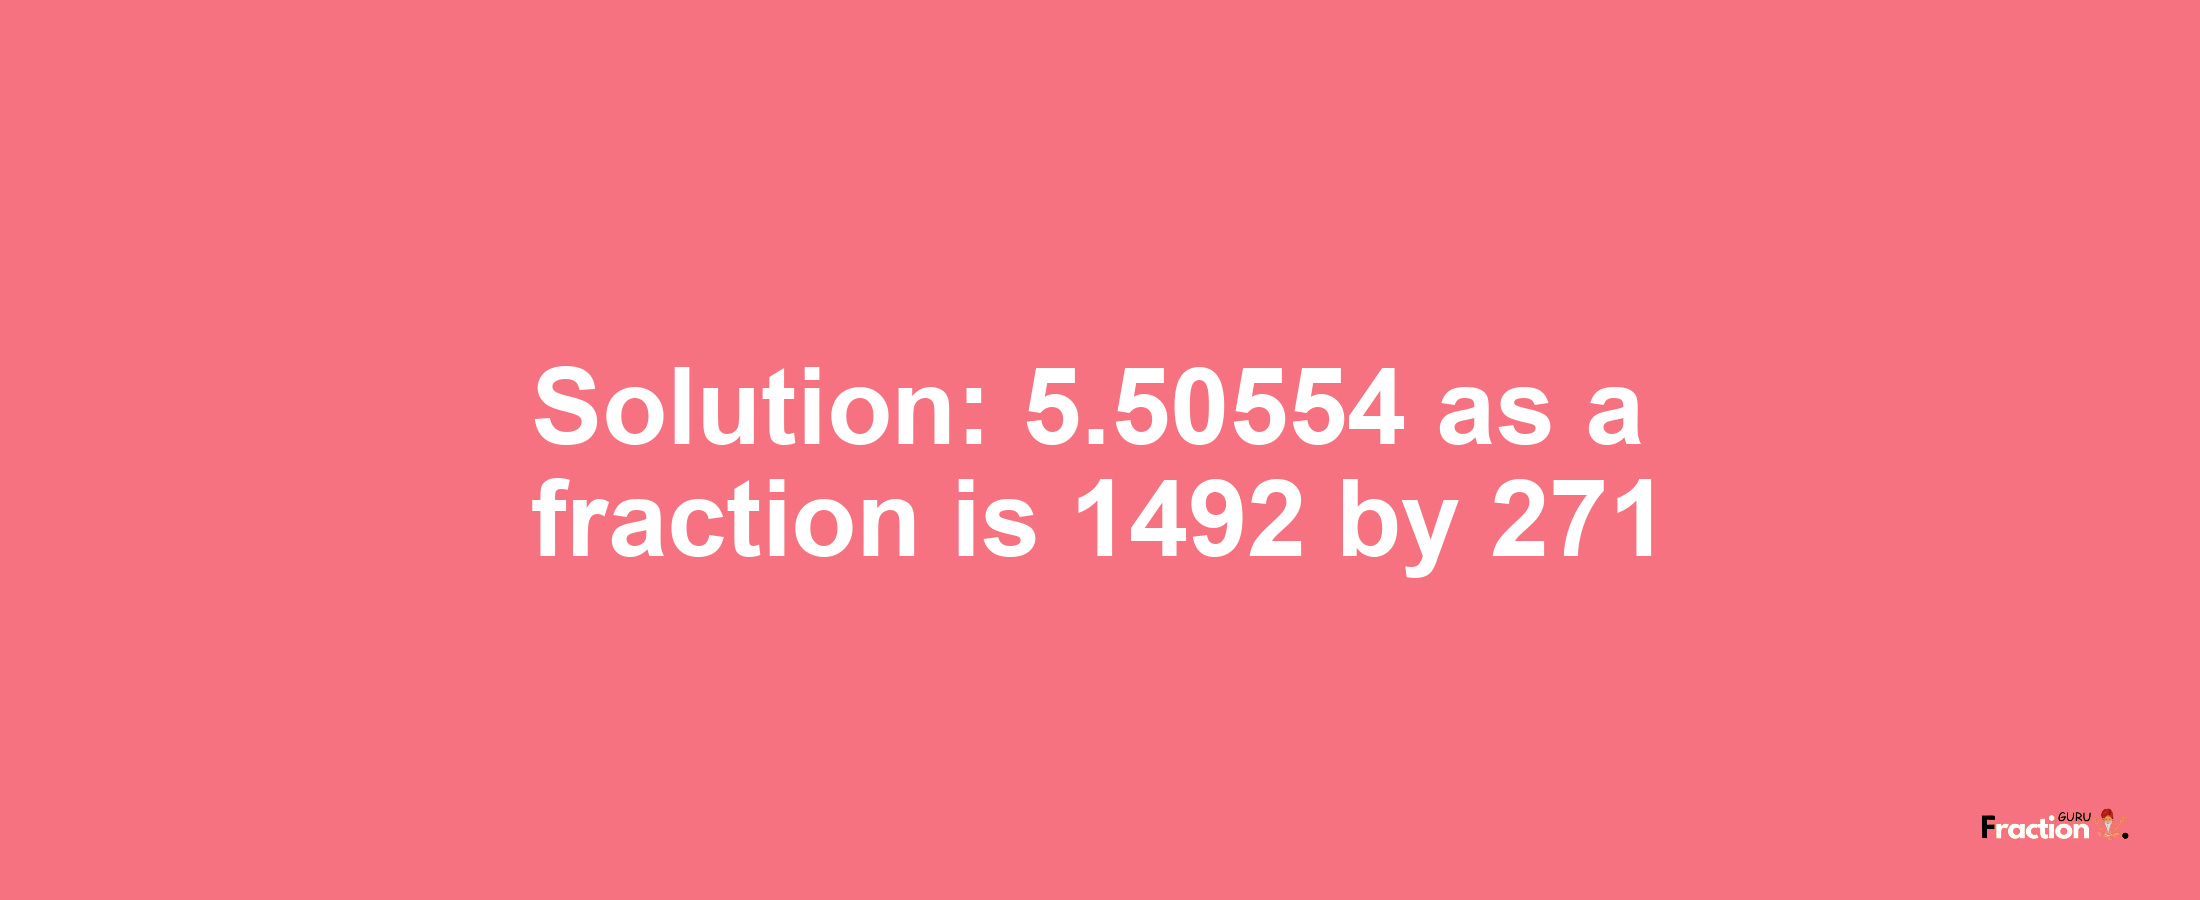 Solution:5.50554 as a fraction is 1492/271